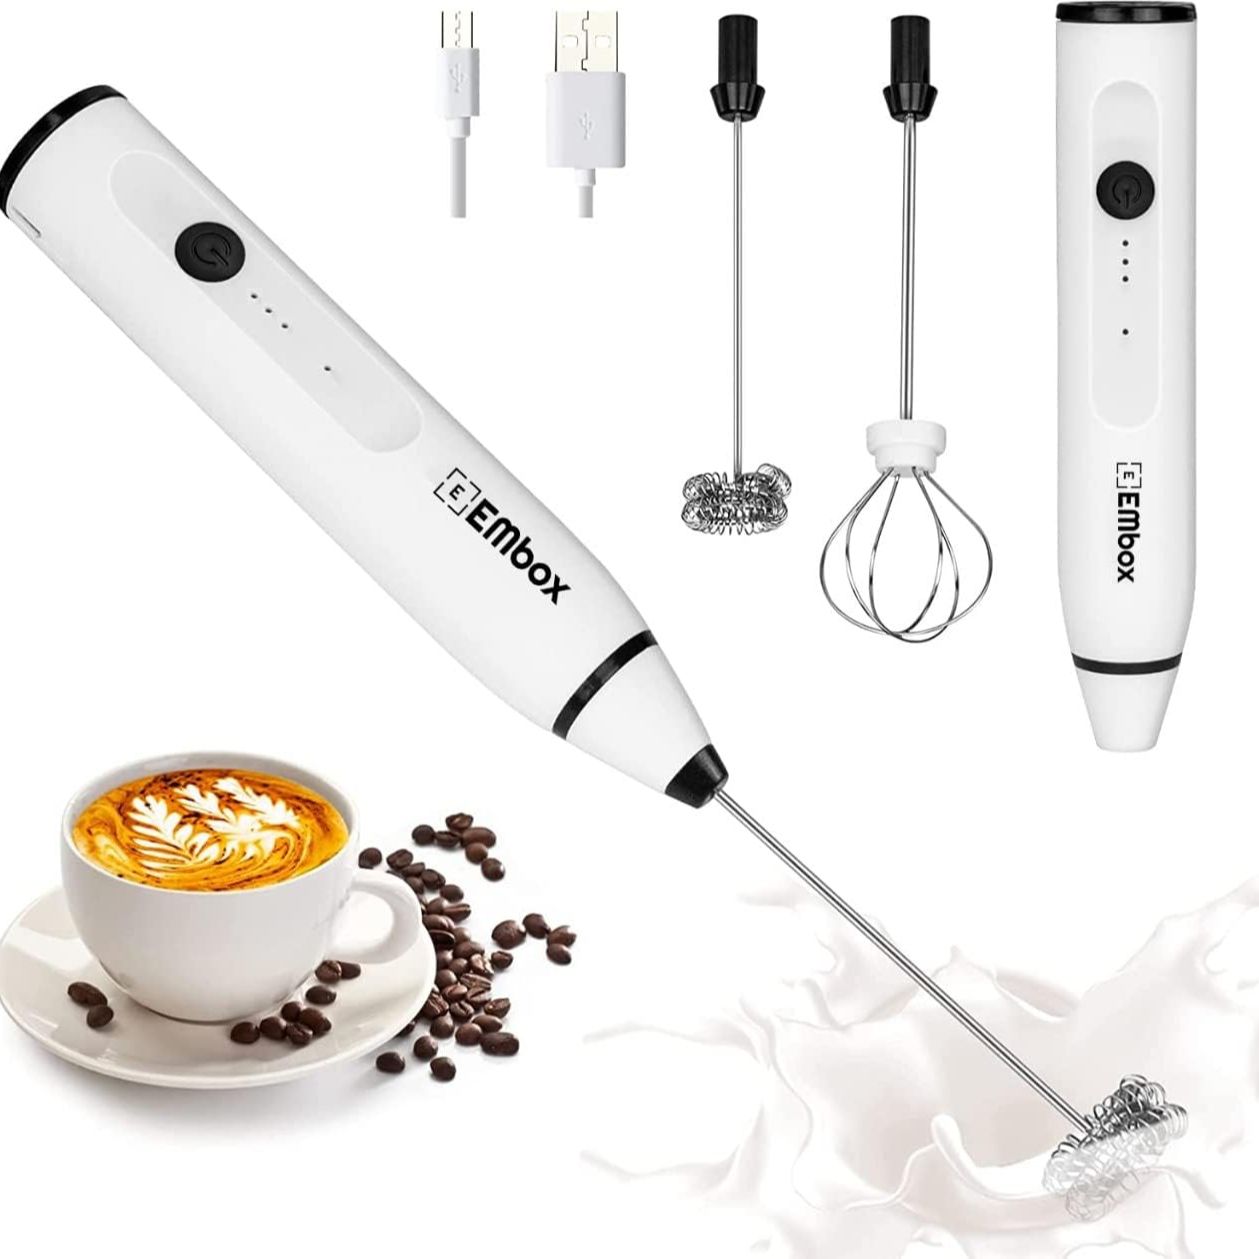  Trace Kasa Milk Frother Handheld, 3-Speed USB